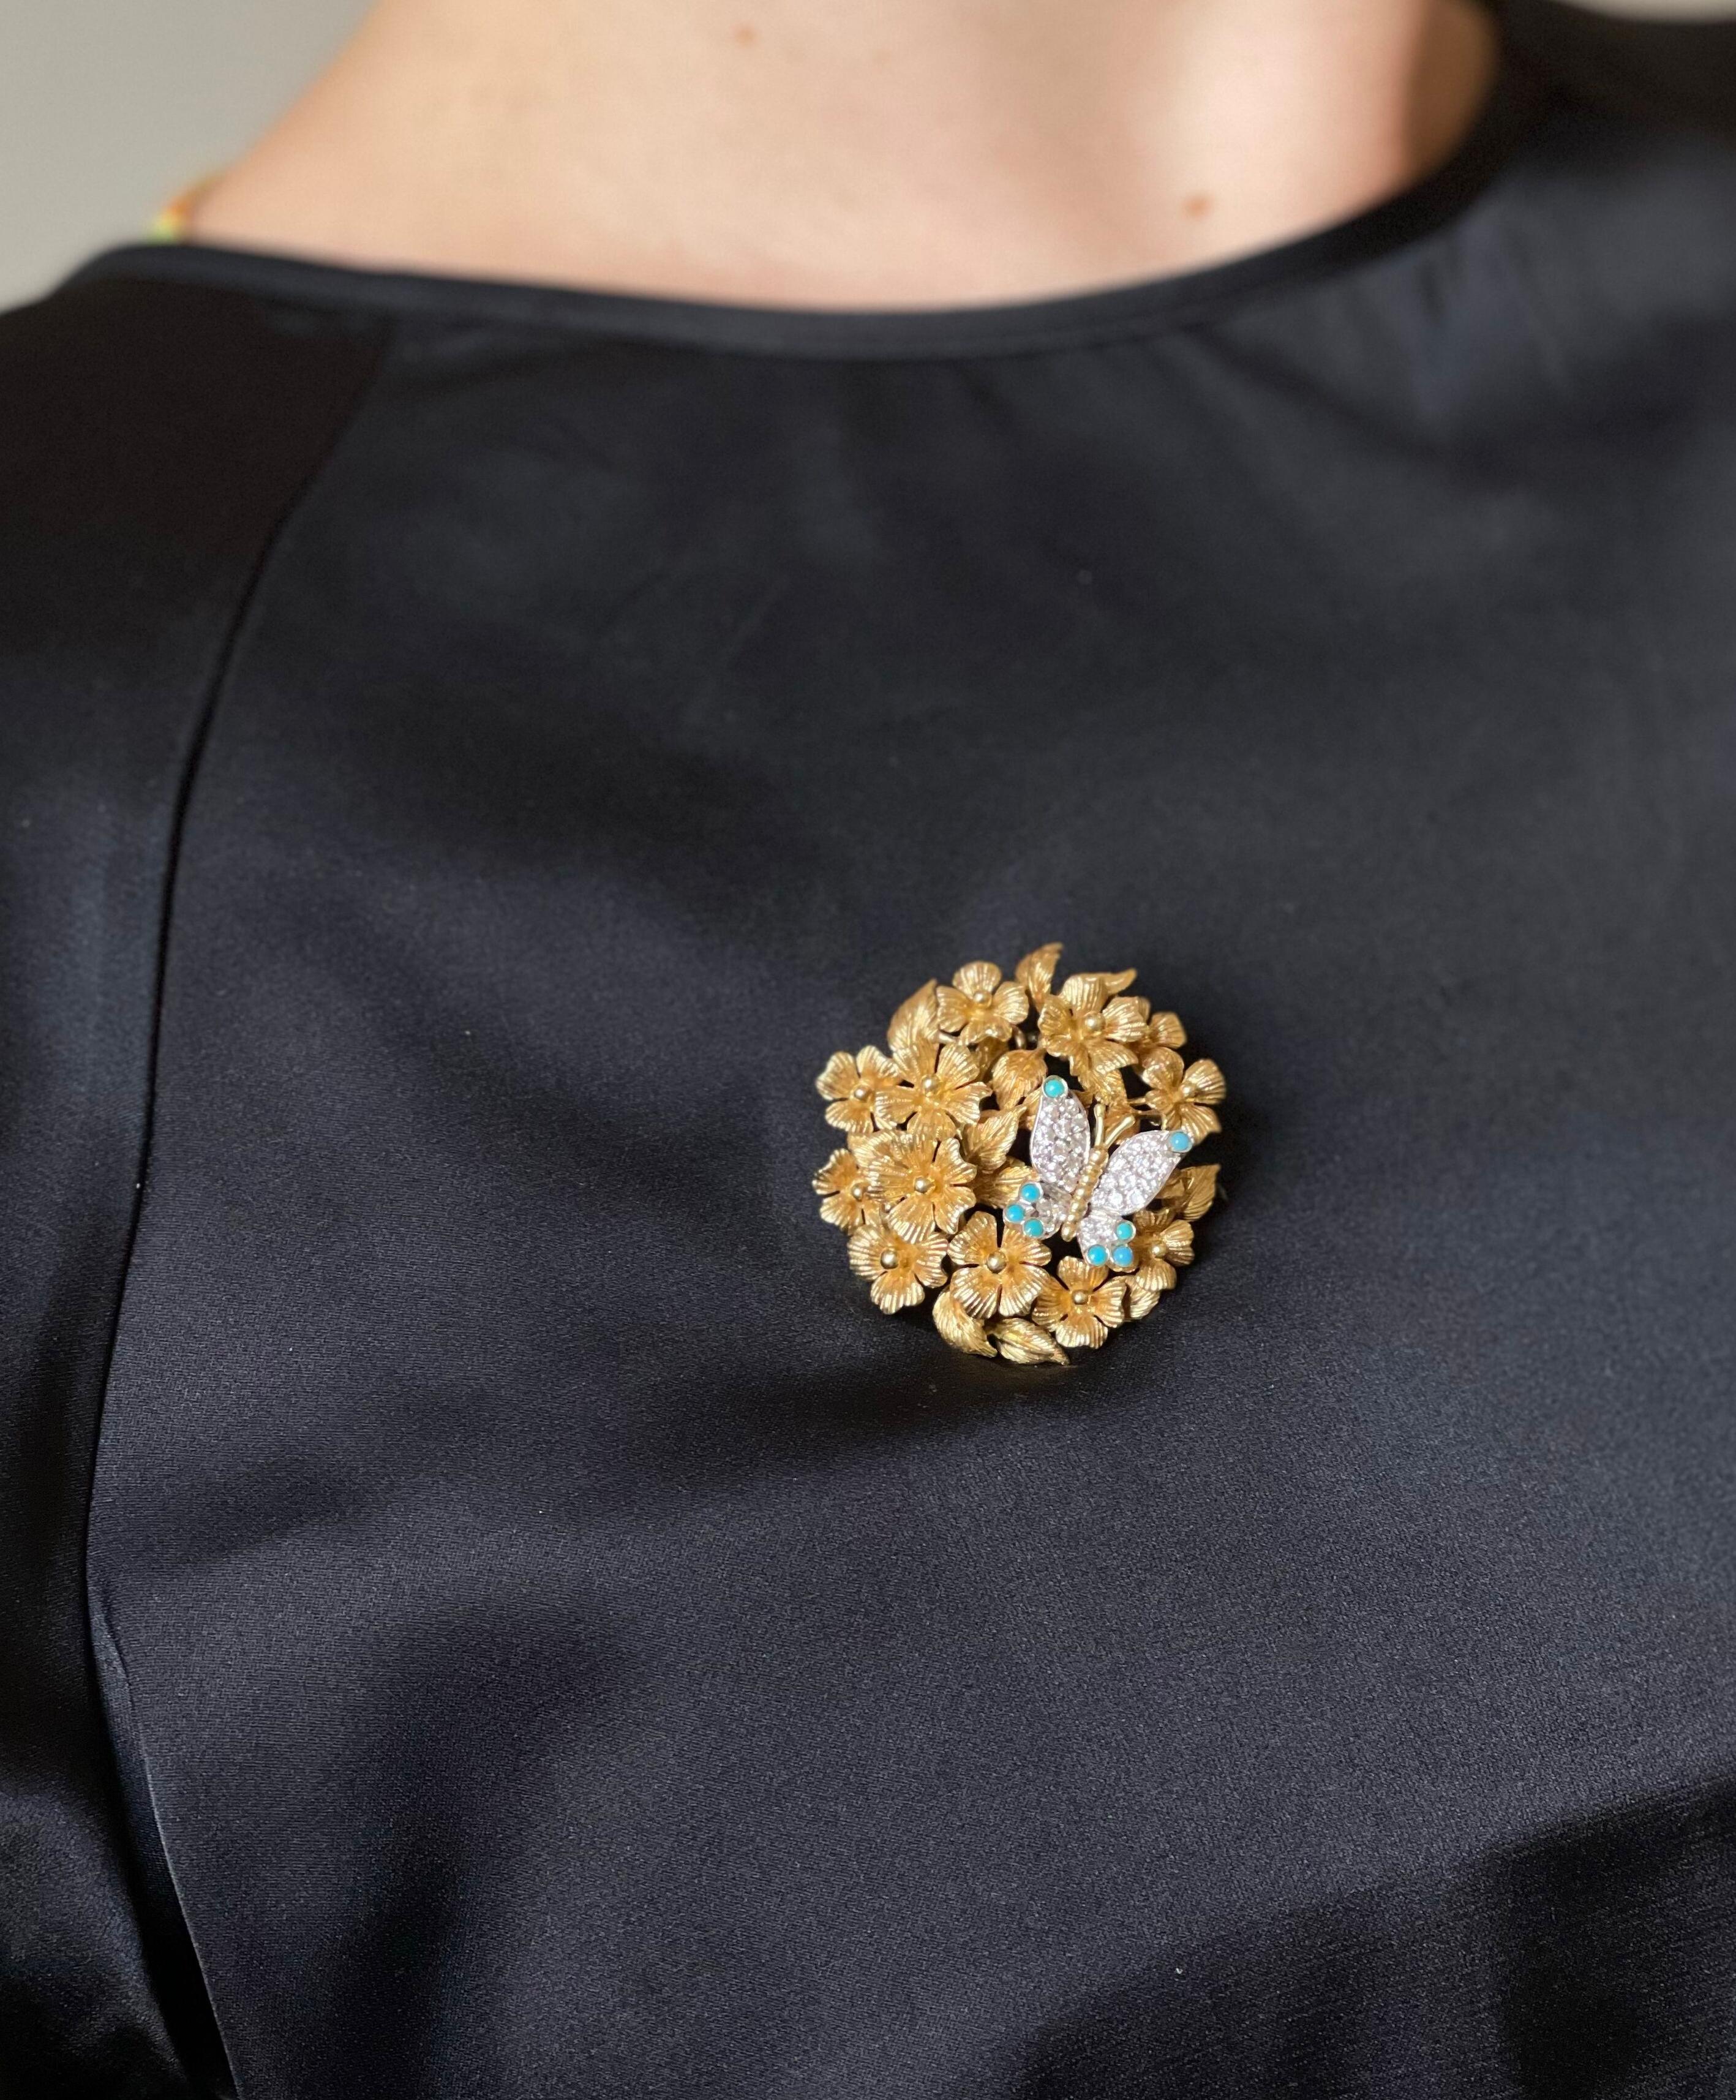 Adorable 18k gold flowers brooch by Tiffany & Co, with platinum butterfly, adorned with turquoise and approx. 0.28ctw in G/VS diamonds. Brooch measures 1.5